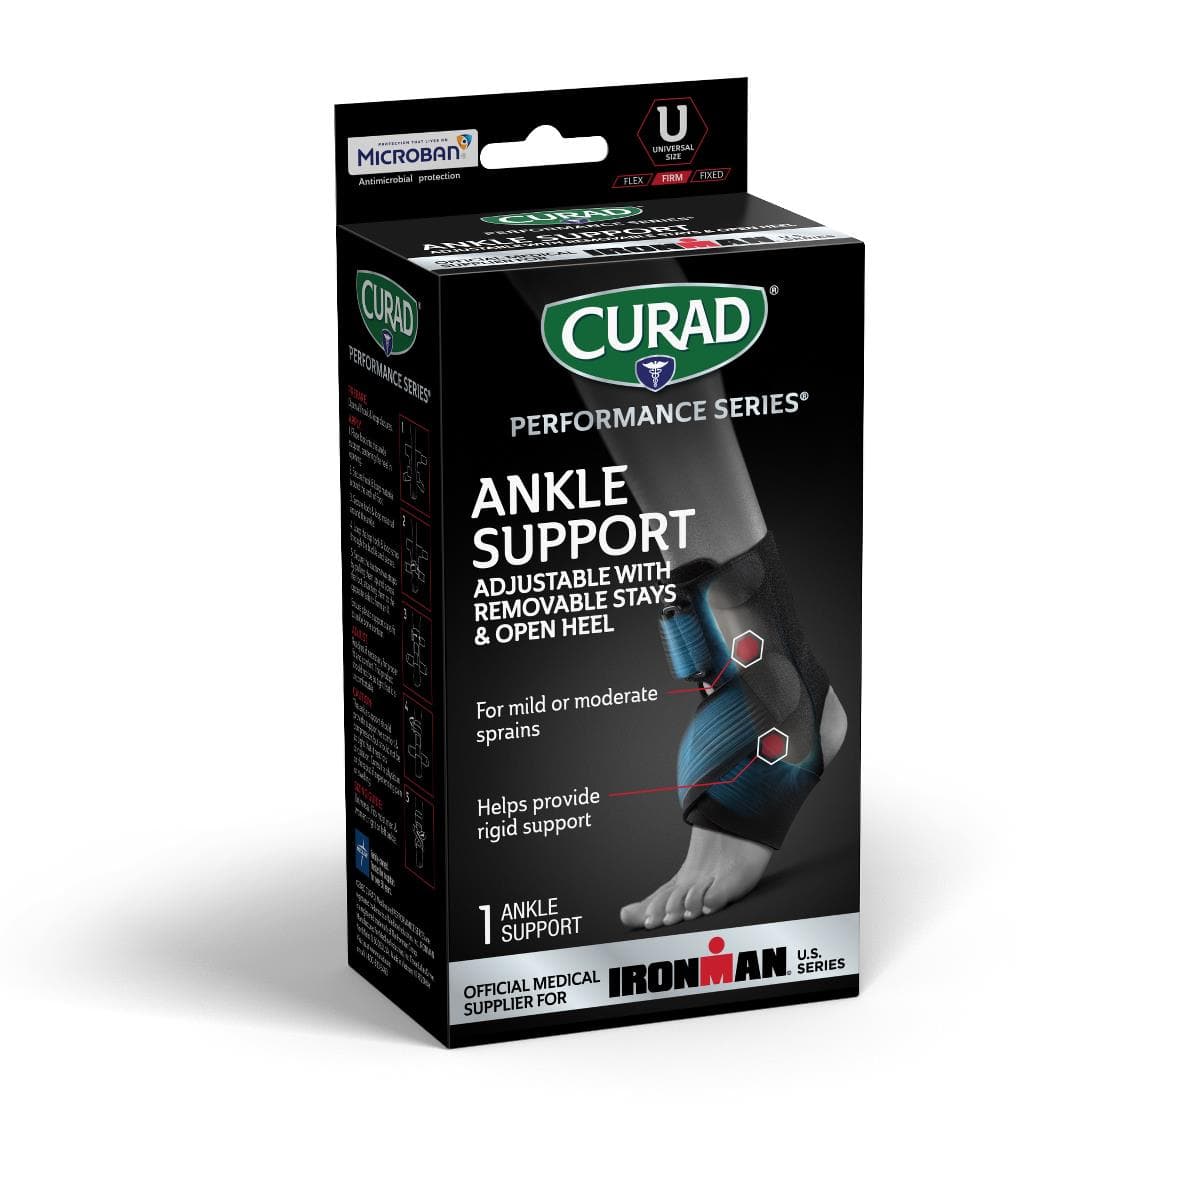 Medline Single Item Medline CURAD Performance Series IRONMAN Ankle Supports with Stays